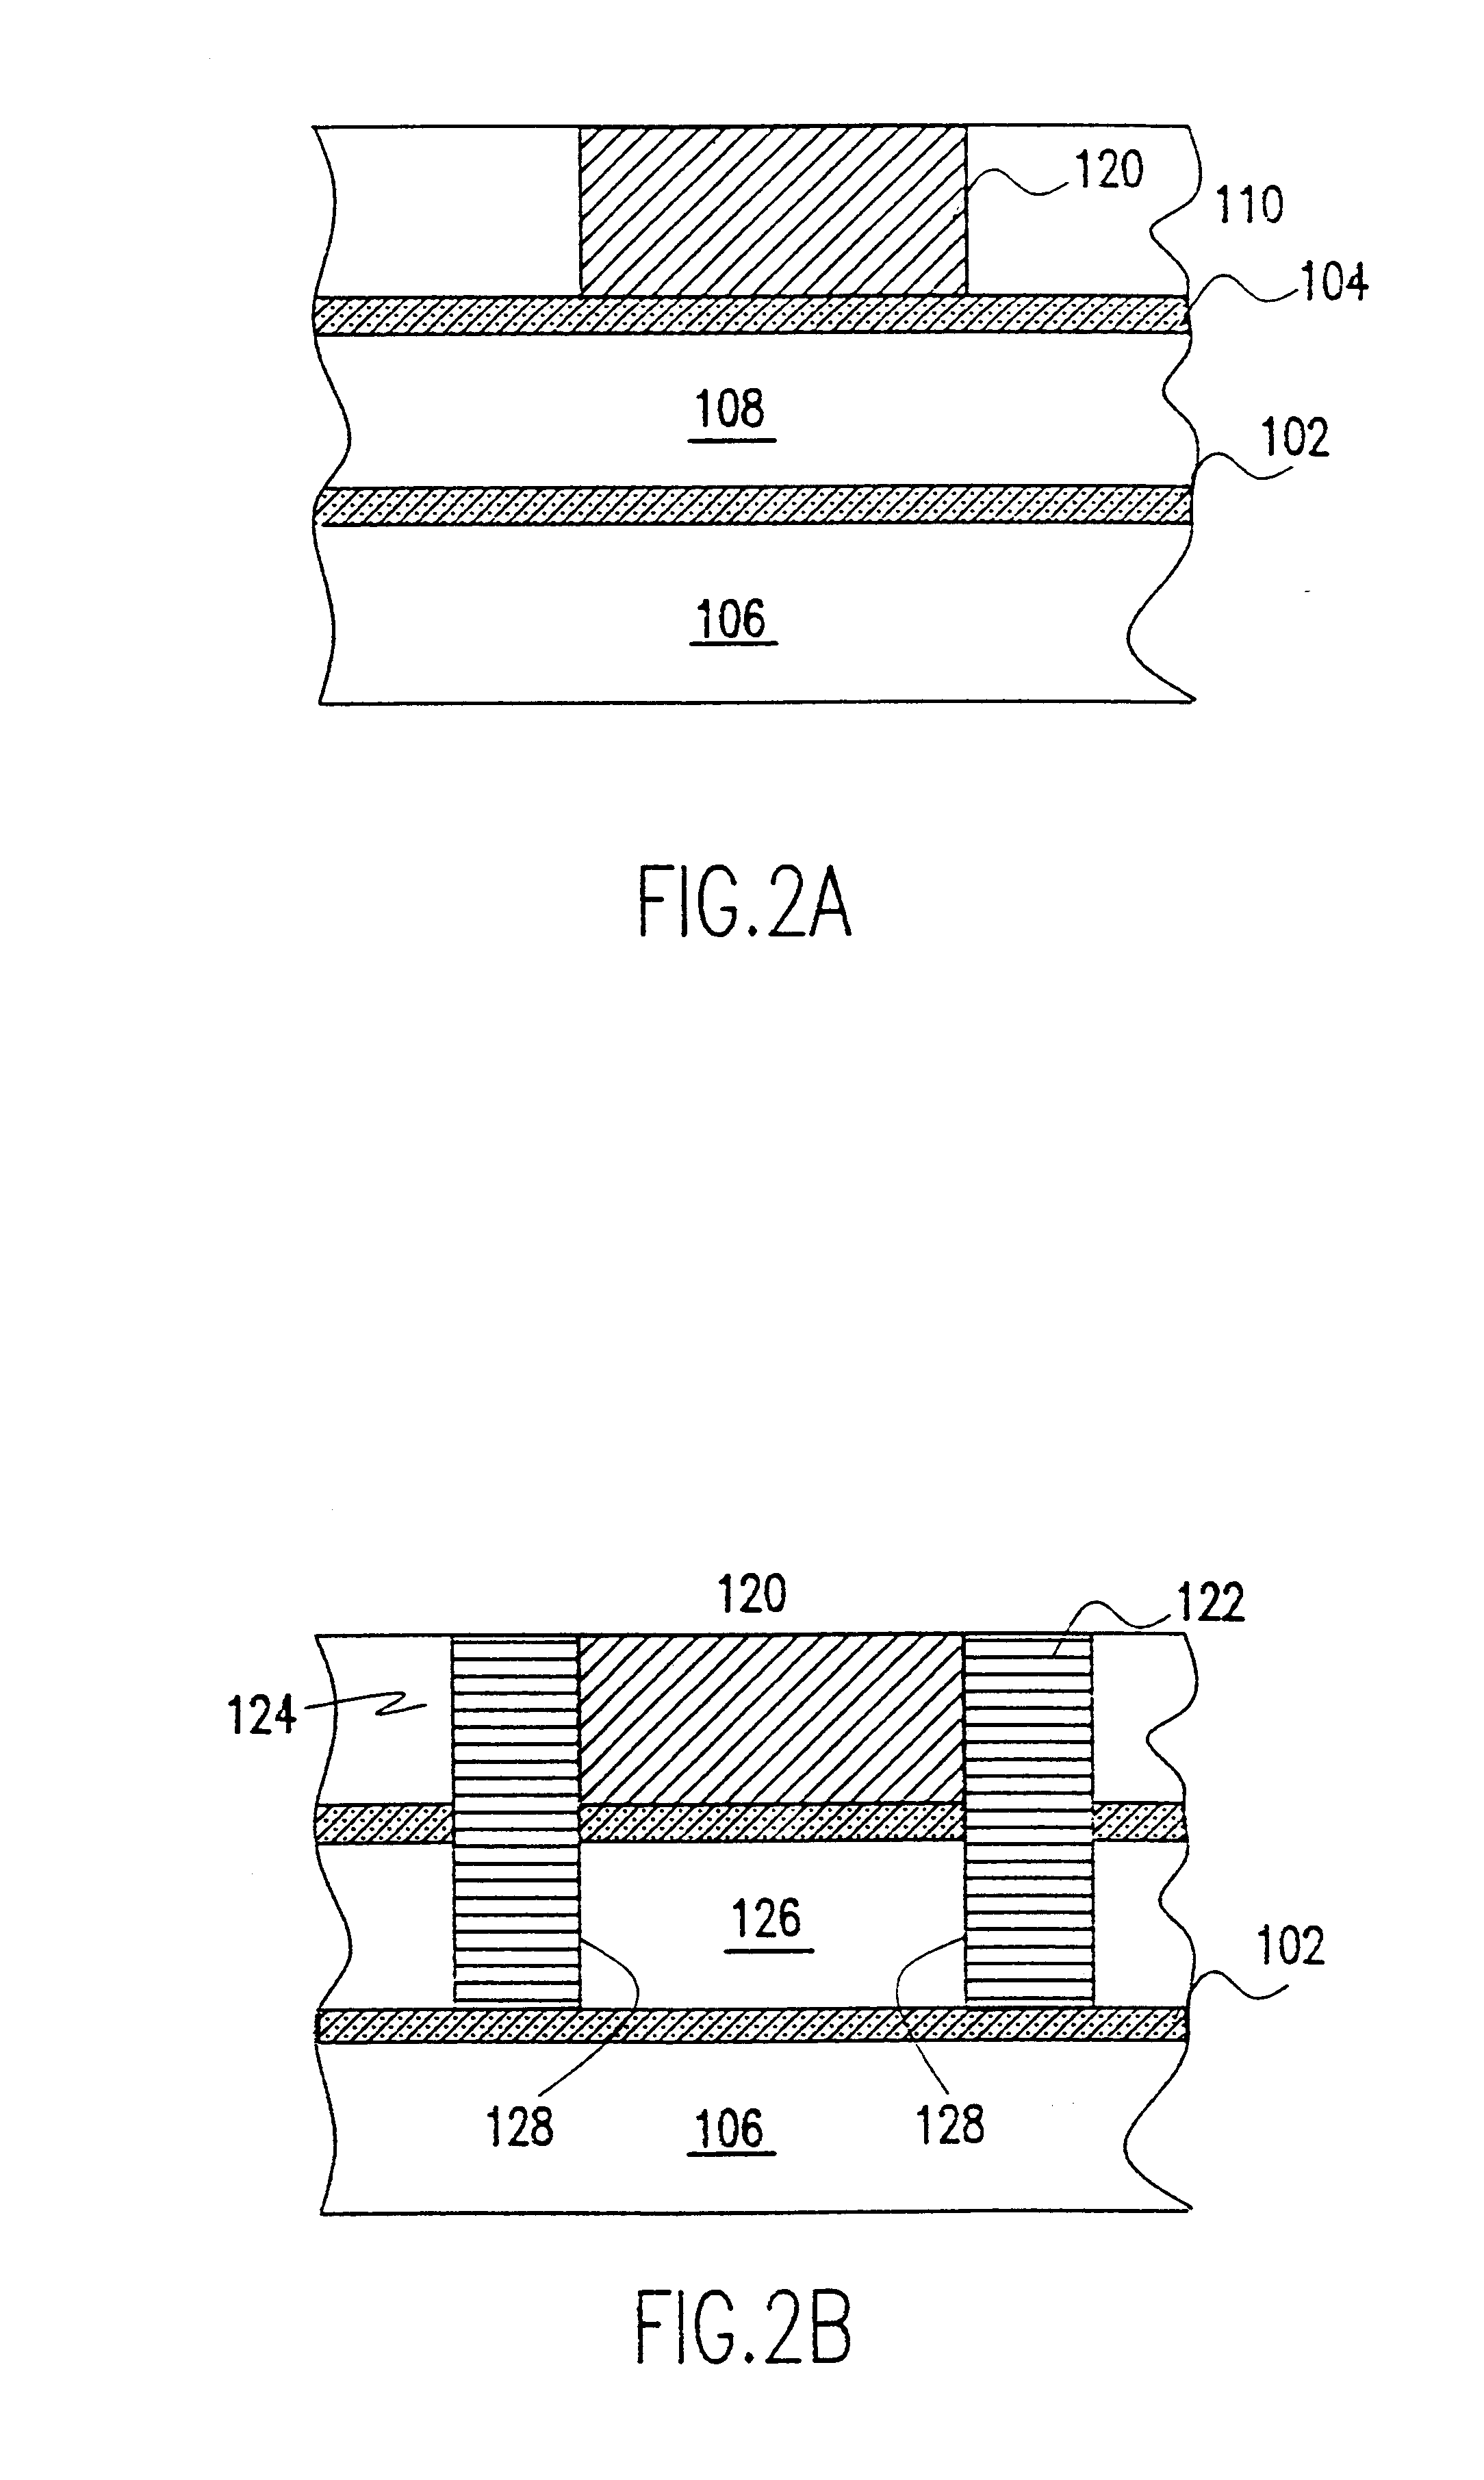 Double silicon-on-insulator device and method thereof